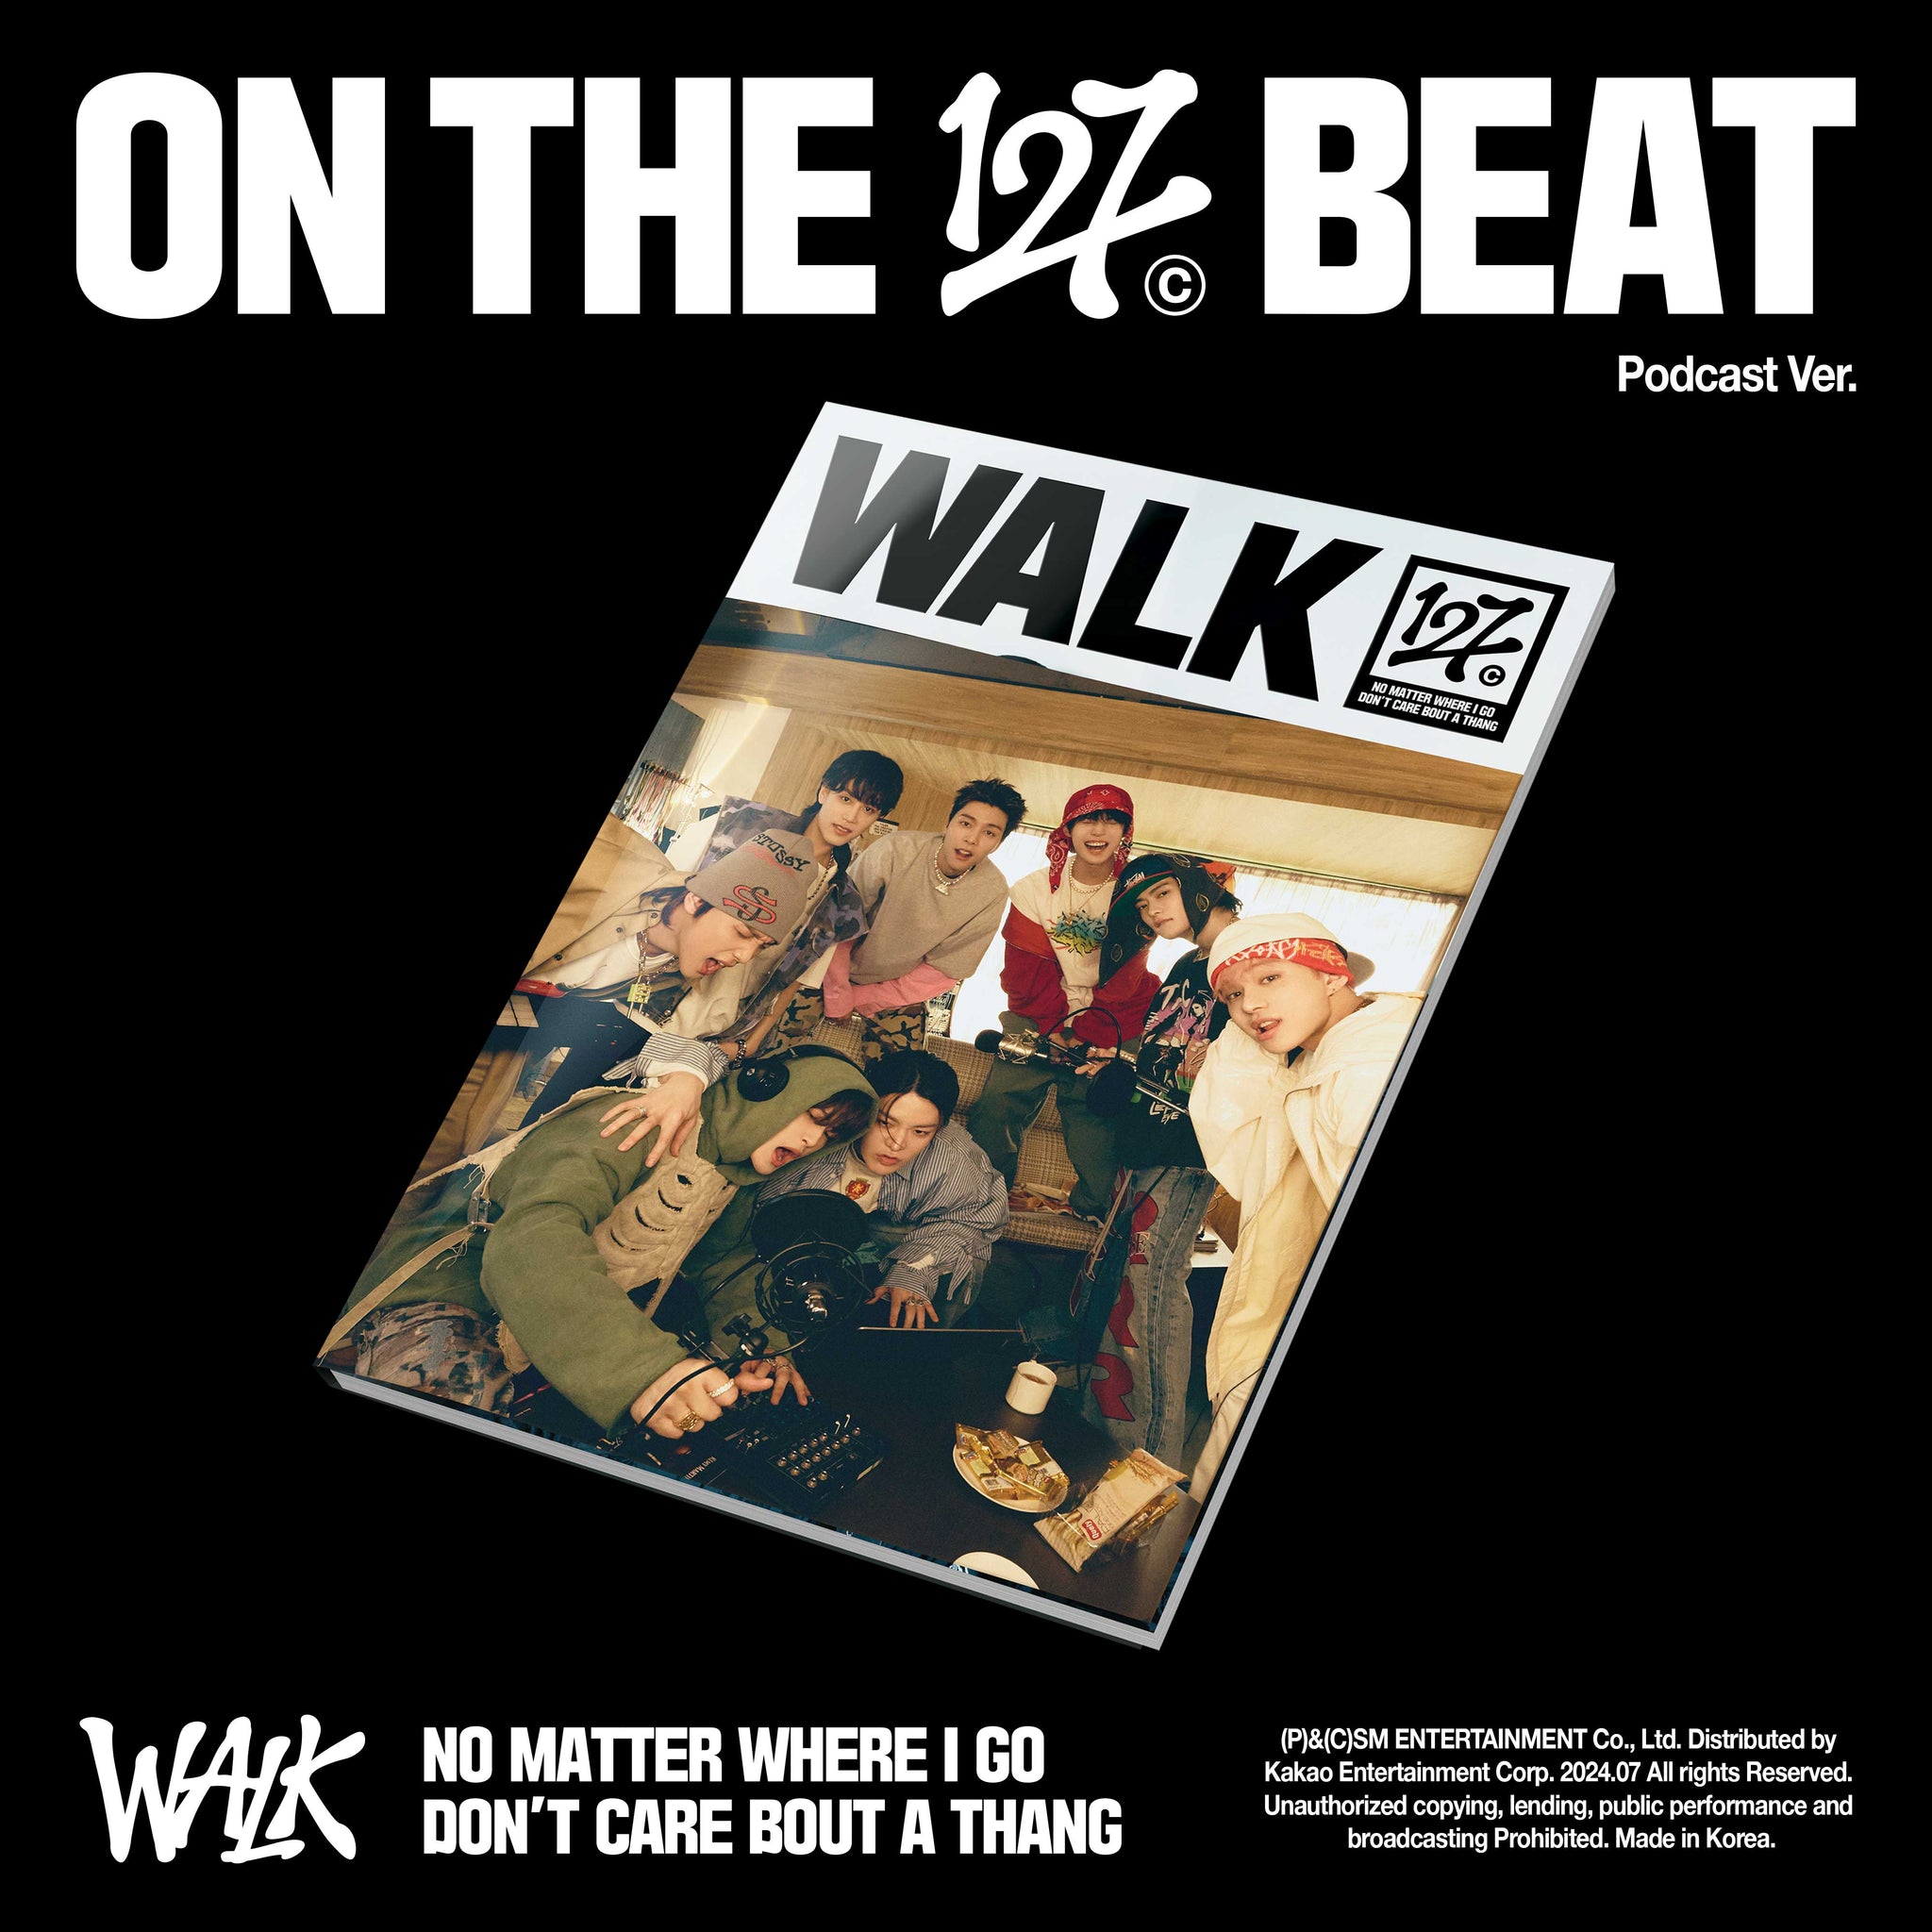 NCT 127 - WALK (Podcast ver.)